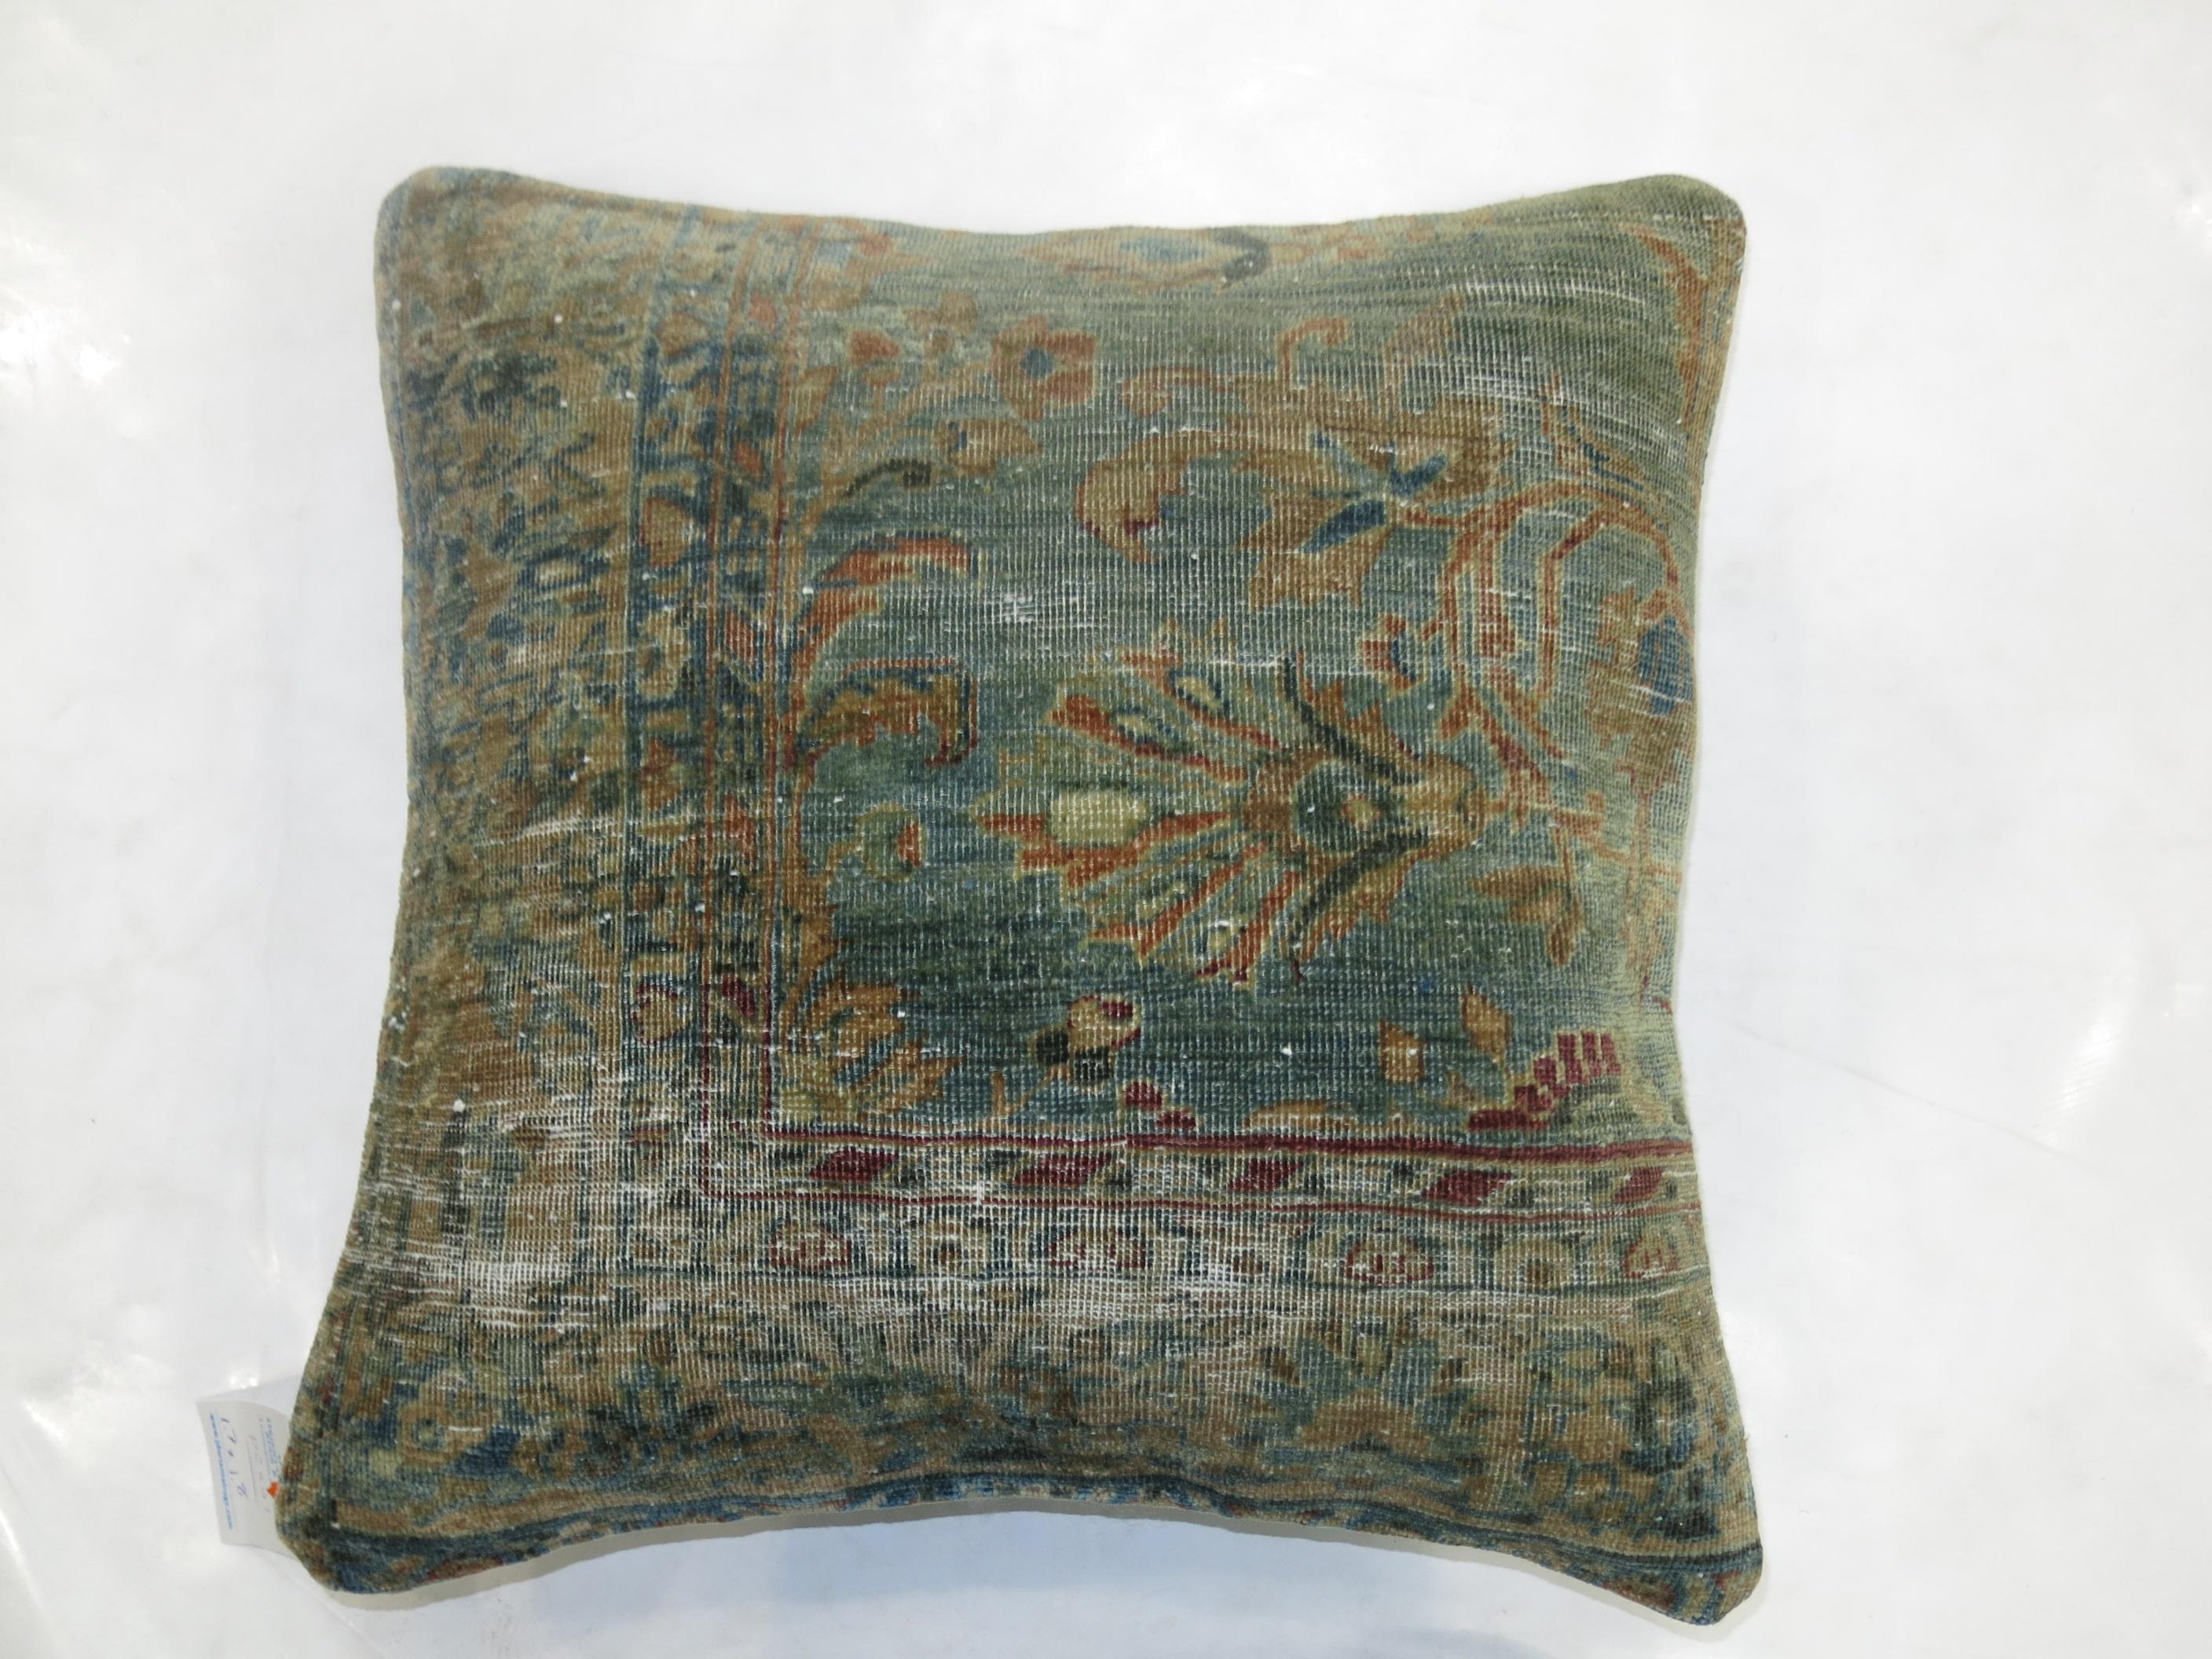 Kashan Shabby Chic Blue Green Antique Persian Rug Pillow